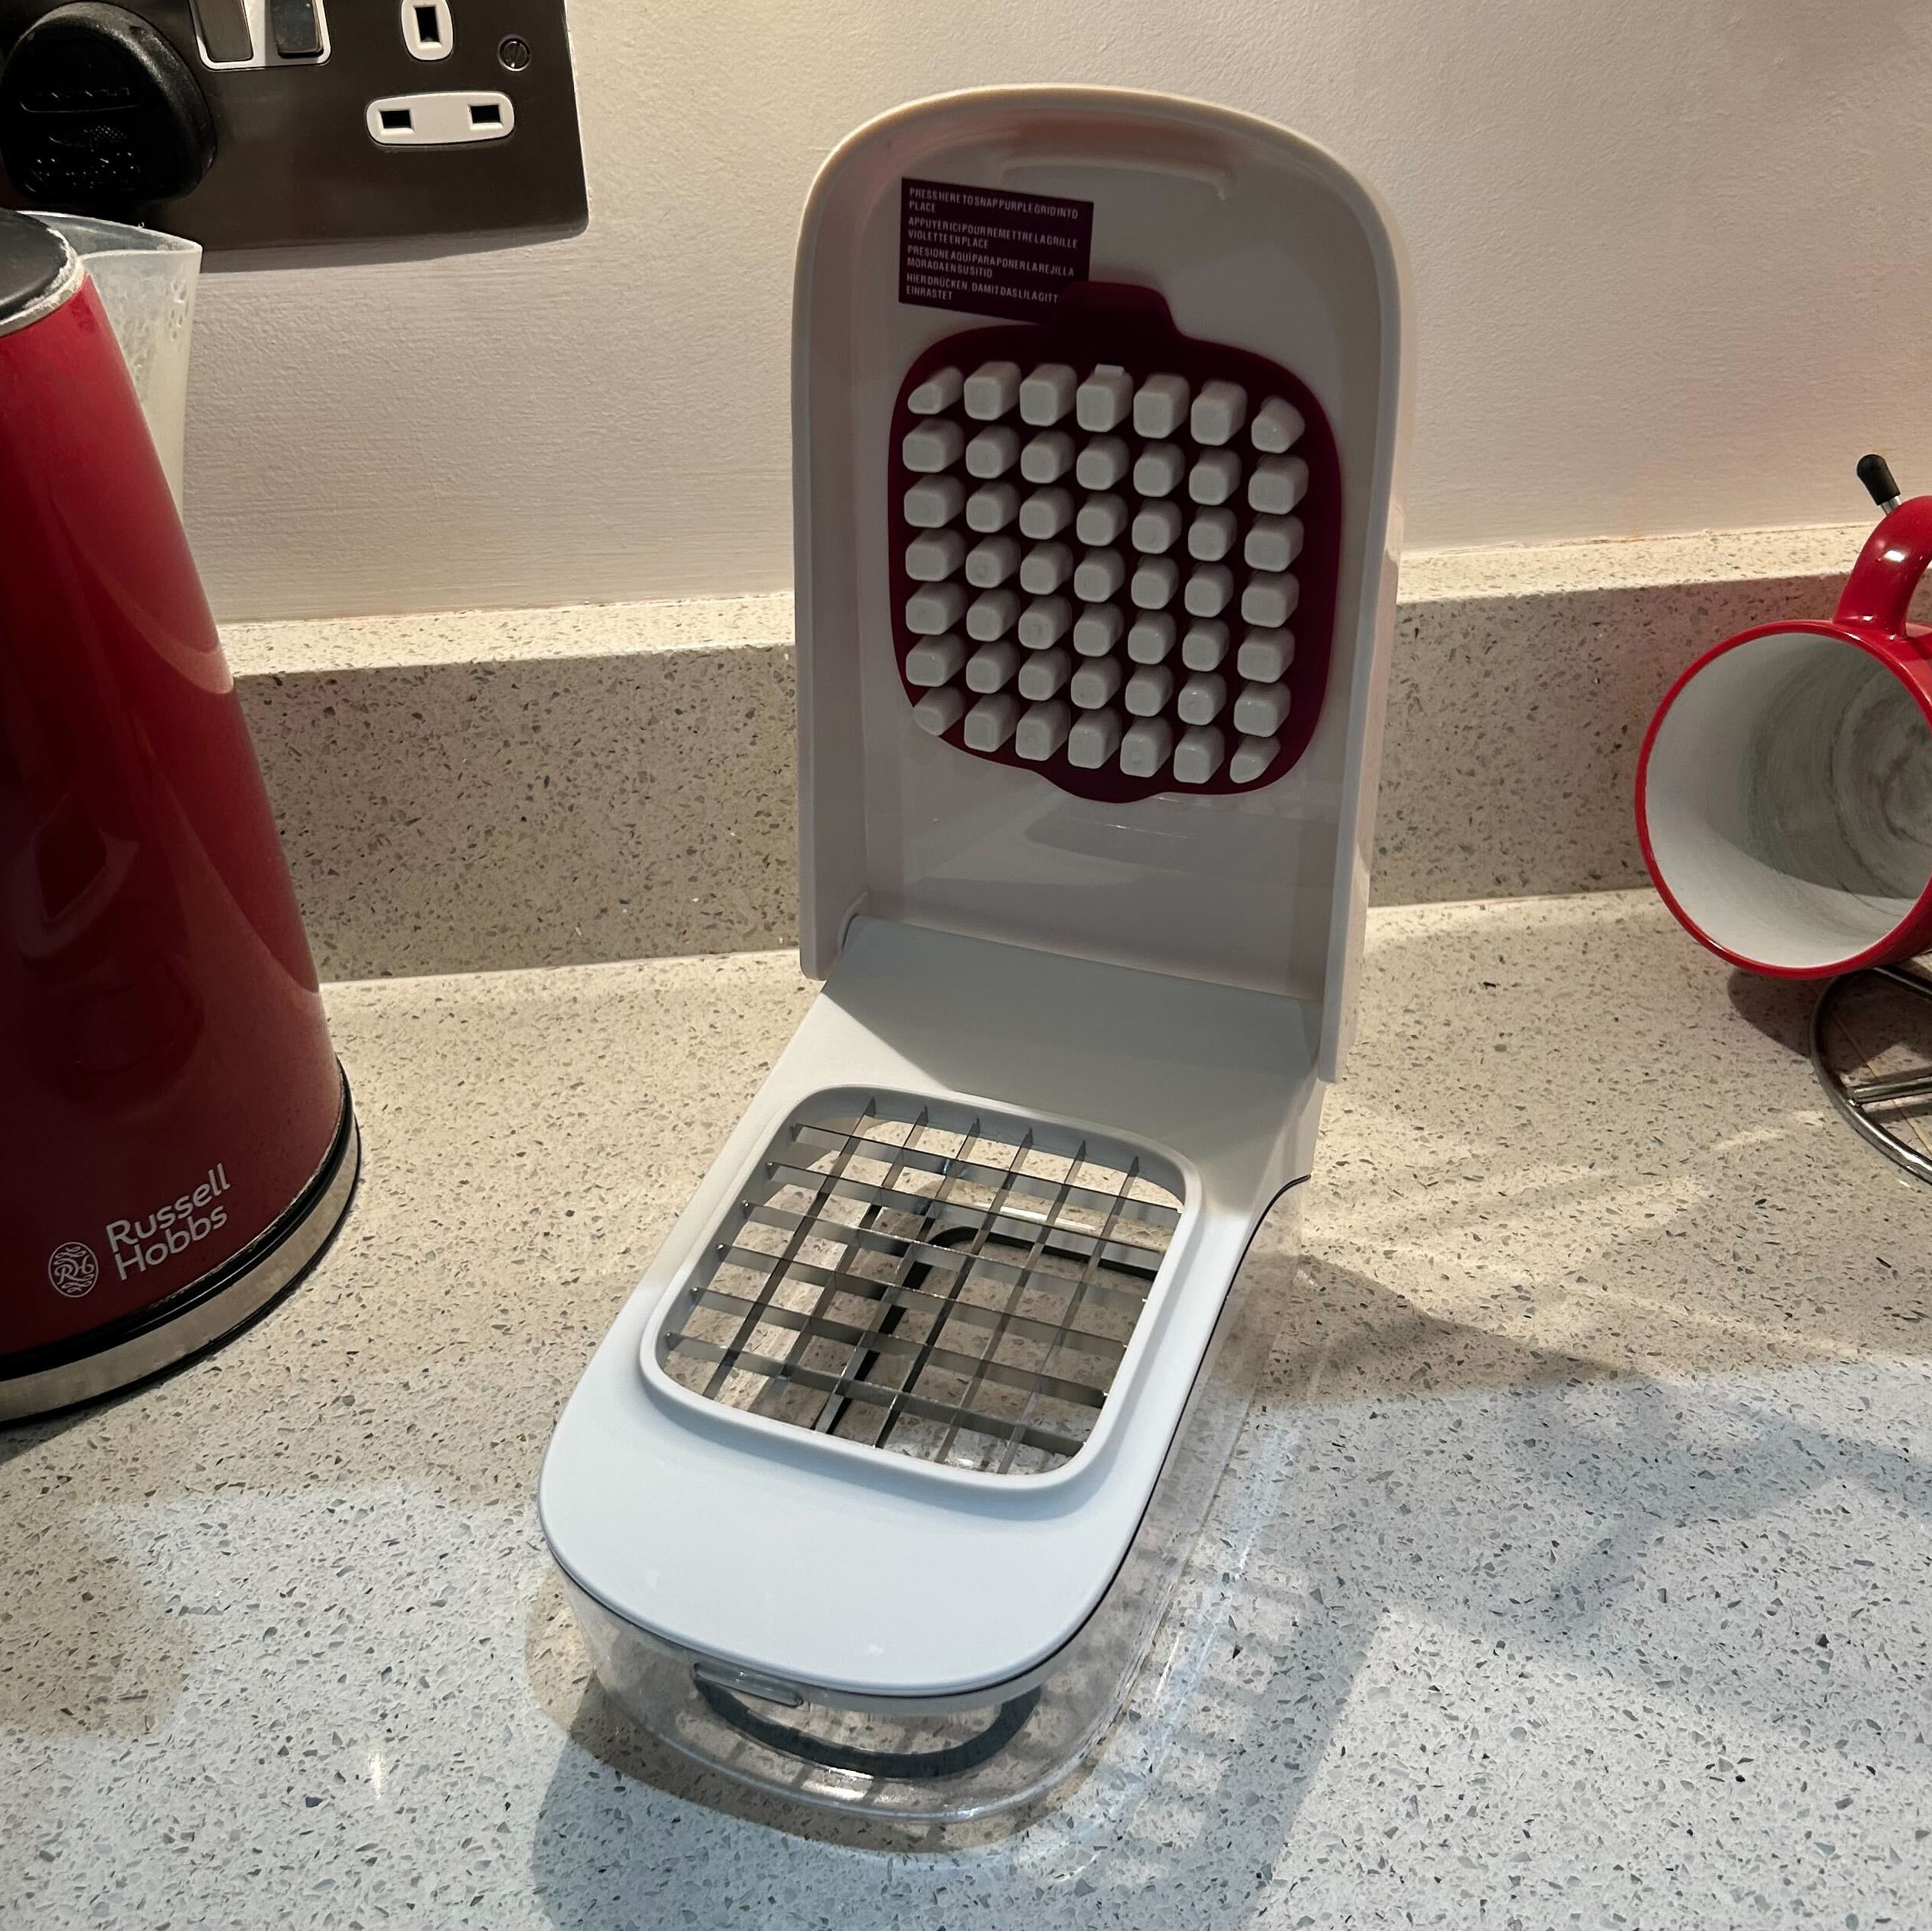 OXO Good Grips Vegetable Chopper review — we tested it